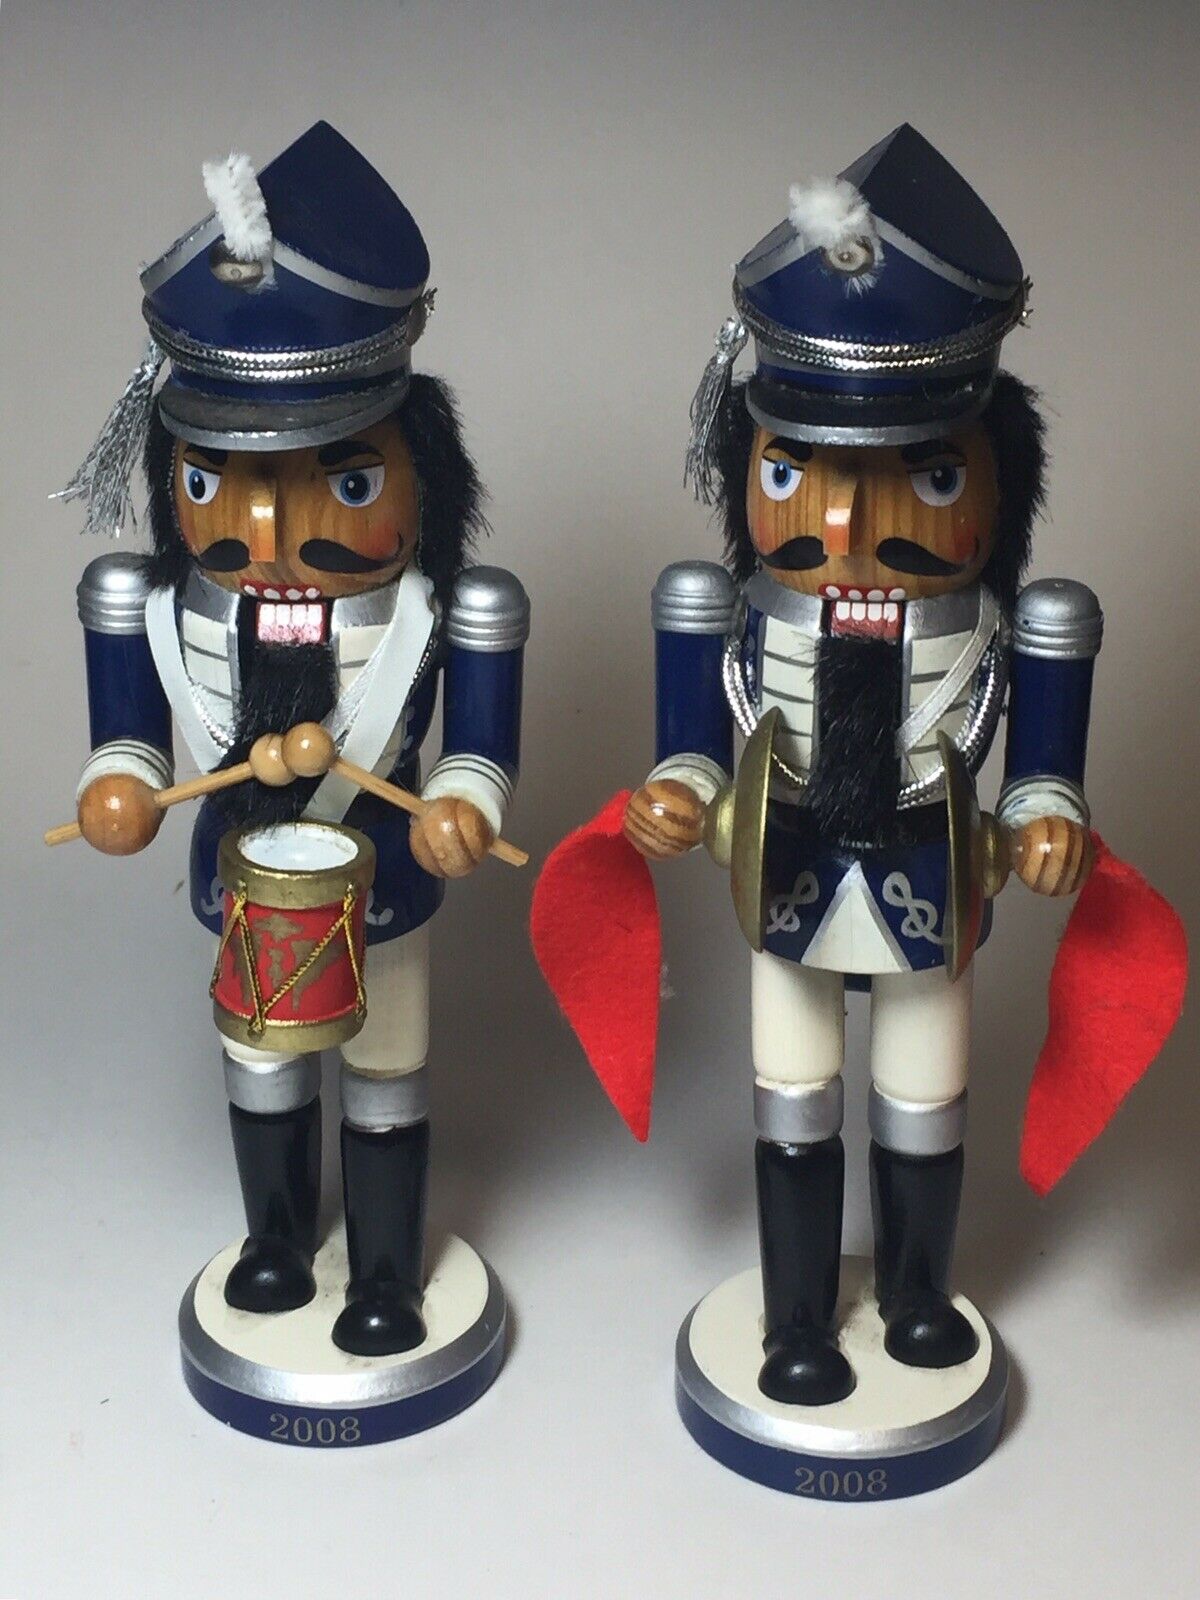 Limited Edition Nutcracker Collection 2008 Drummer And Cymbals 8” Set Of 2